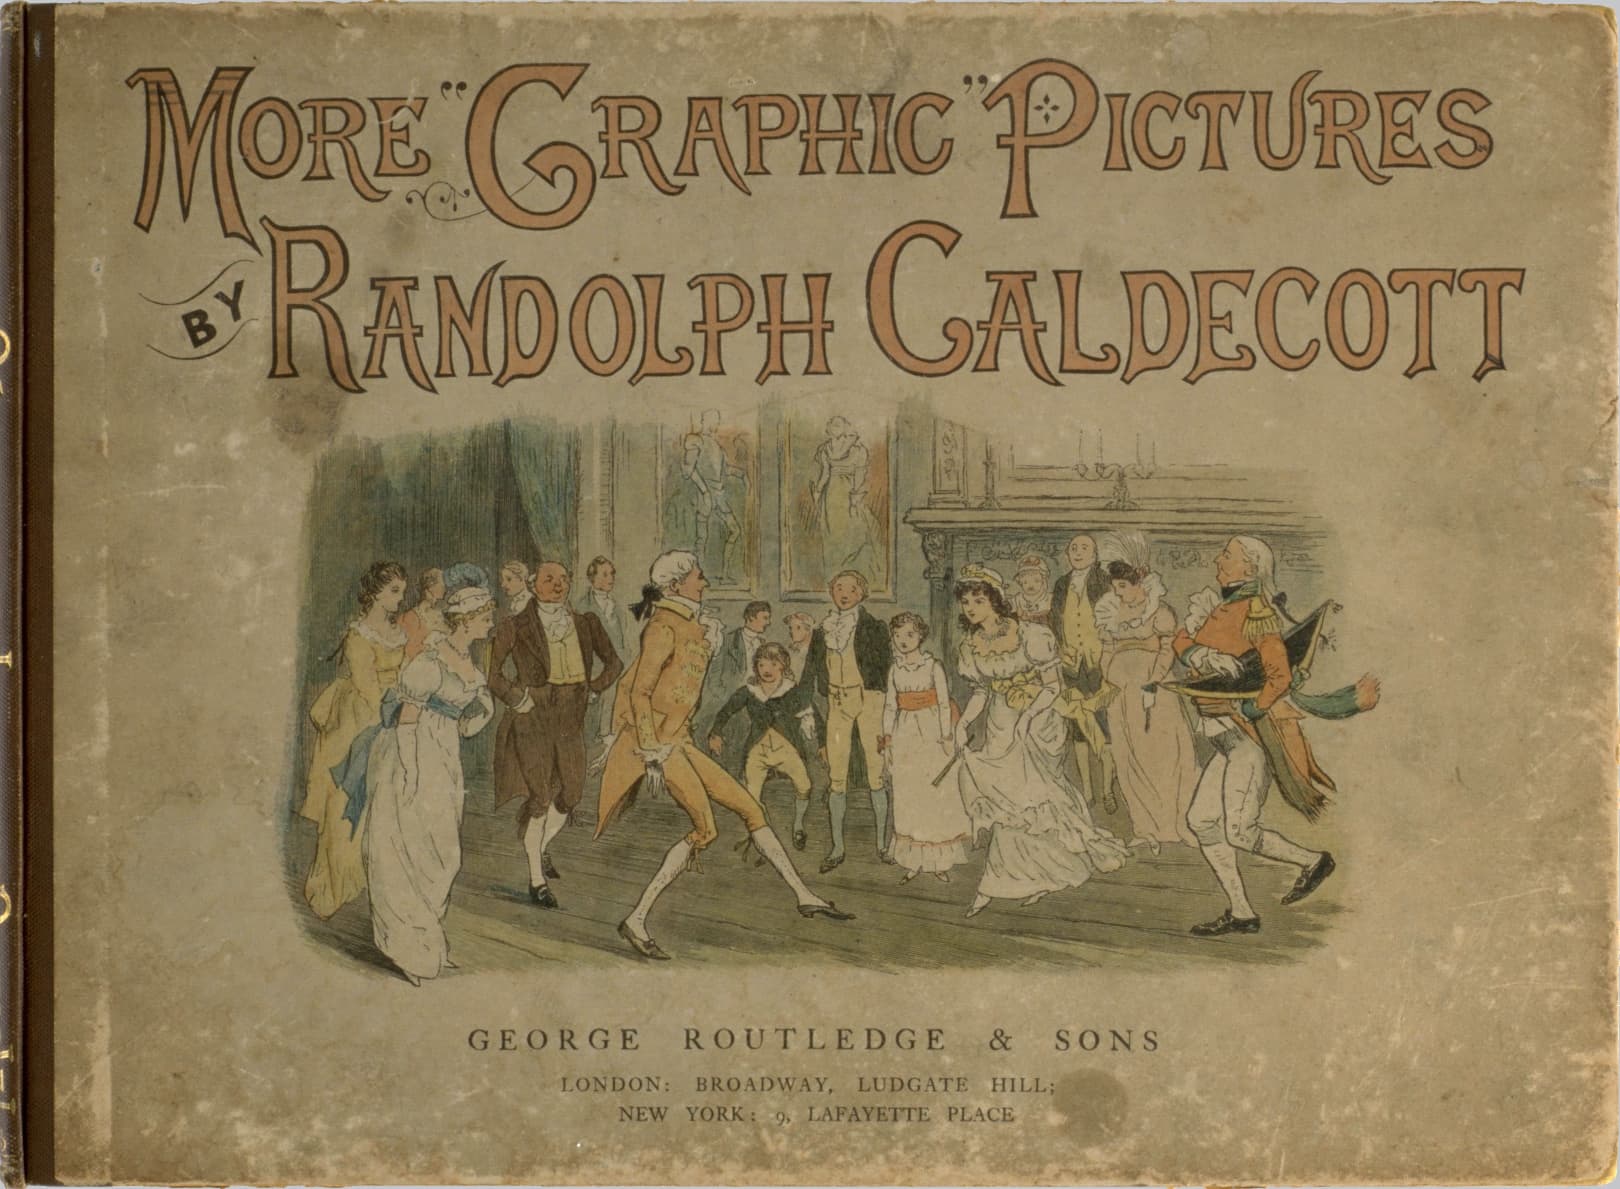 Cover of “More Graphic Pictures BY Randolph Caldecott”